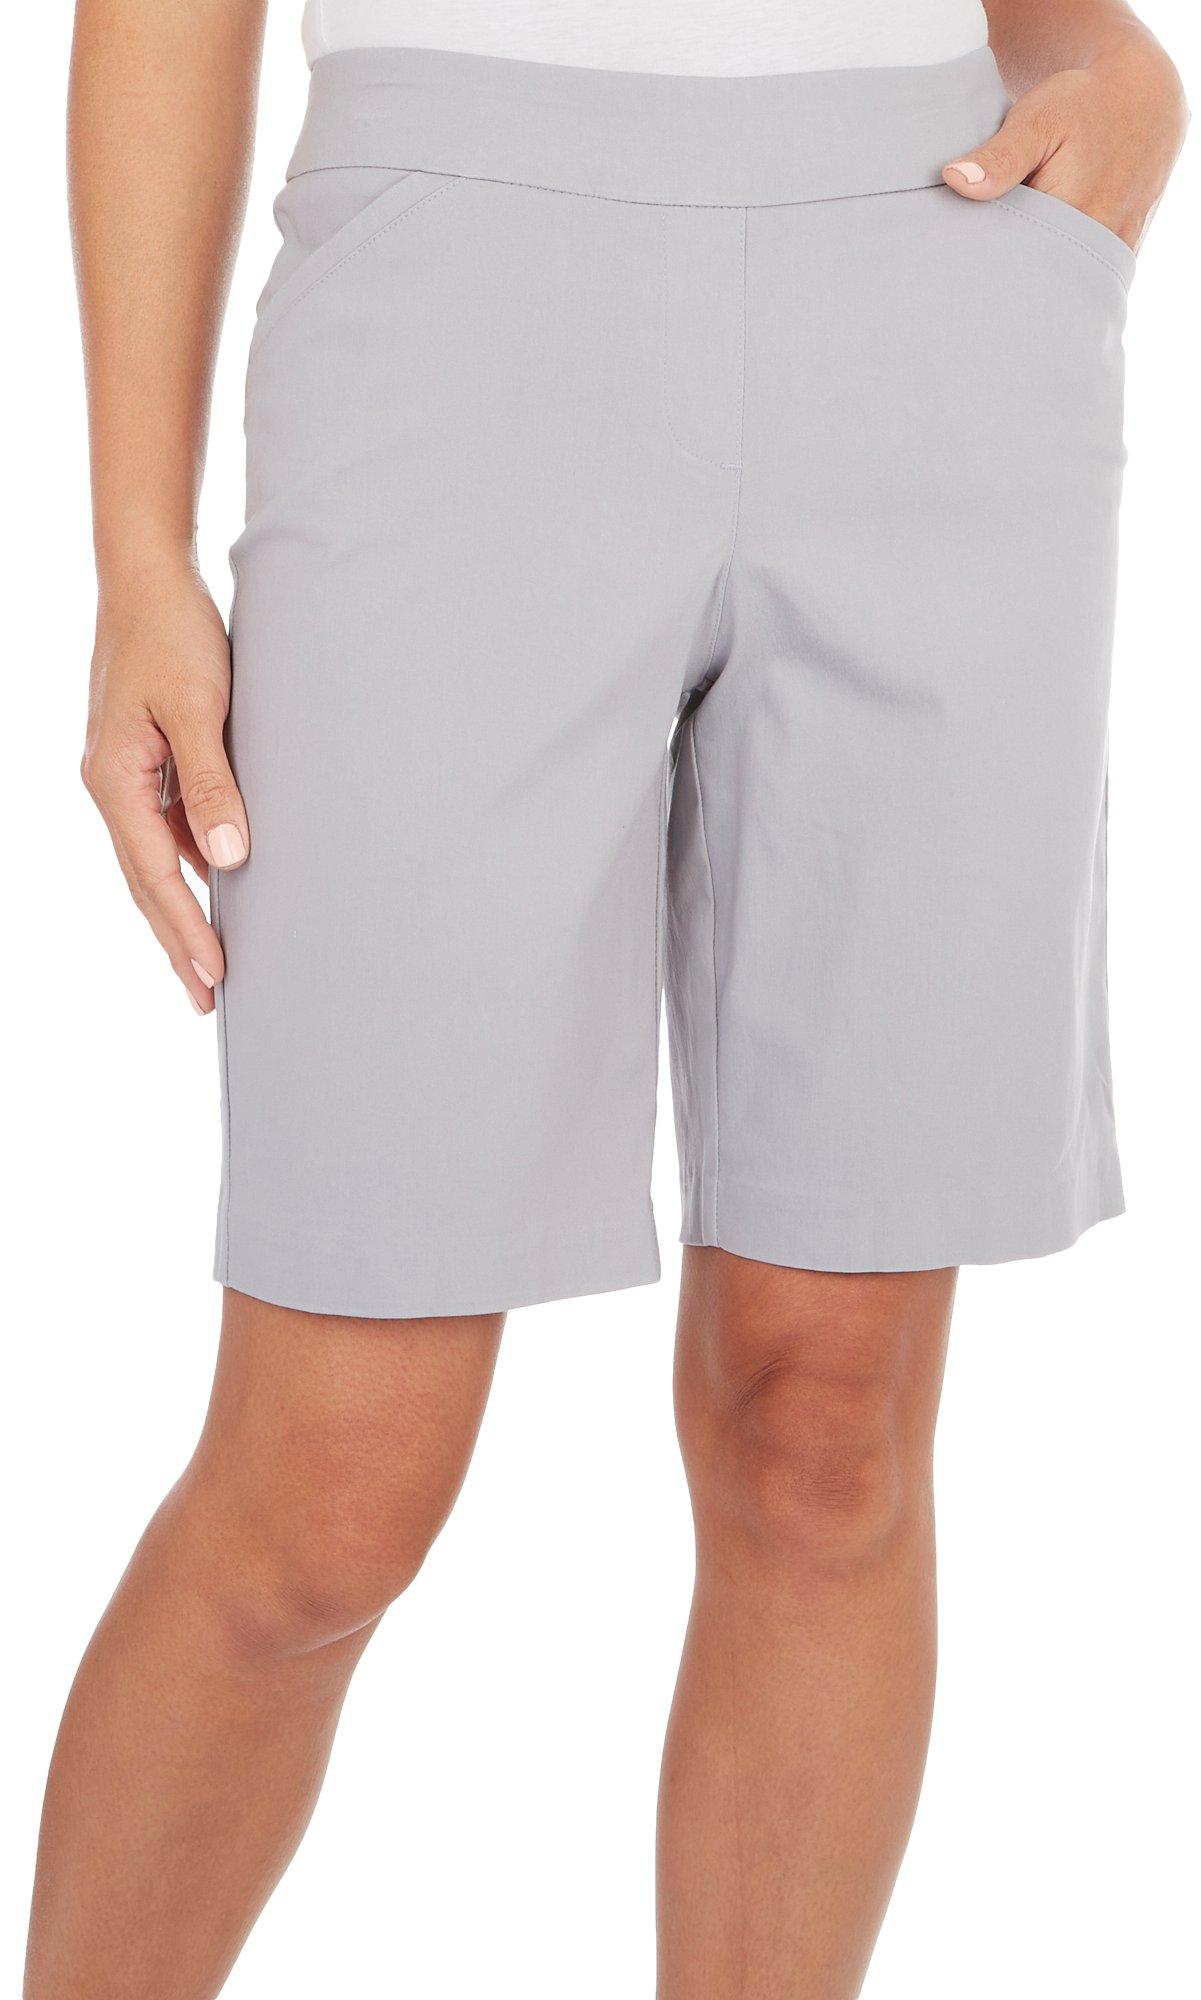 https://images.beallsflorida.com/i/beallsflorida/258-5086-8975-04-yyy/*Petite-10in.-Solid-Pull-On-Shorts*?$product$&fmt=auto&qlt=default